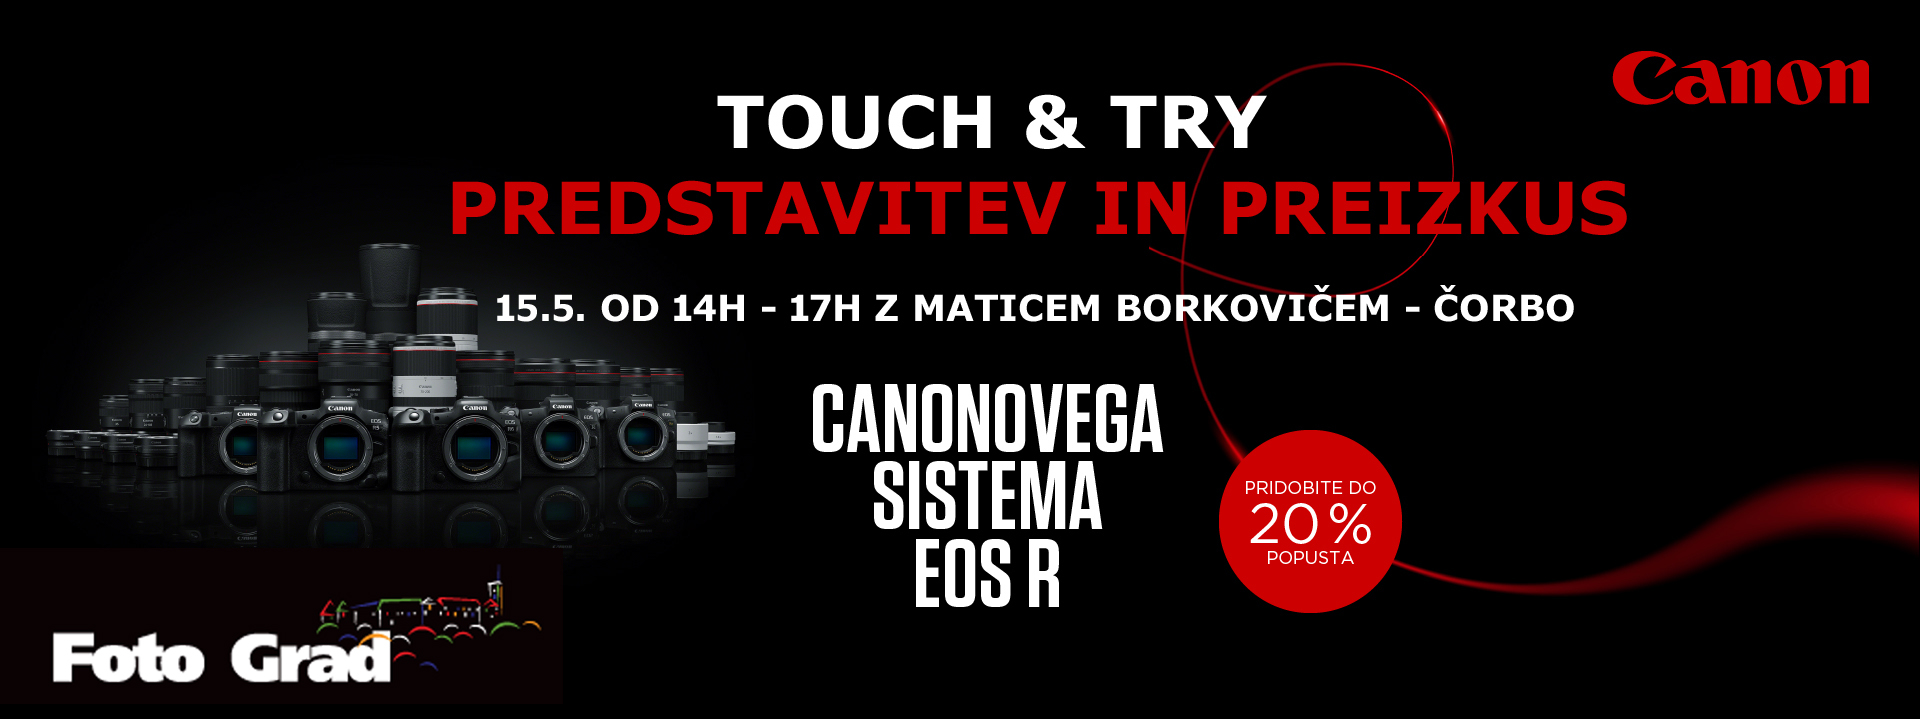 CANON EOS R TOUCH & TRY 15.5.2024 14h - 17h